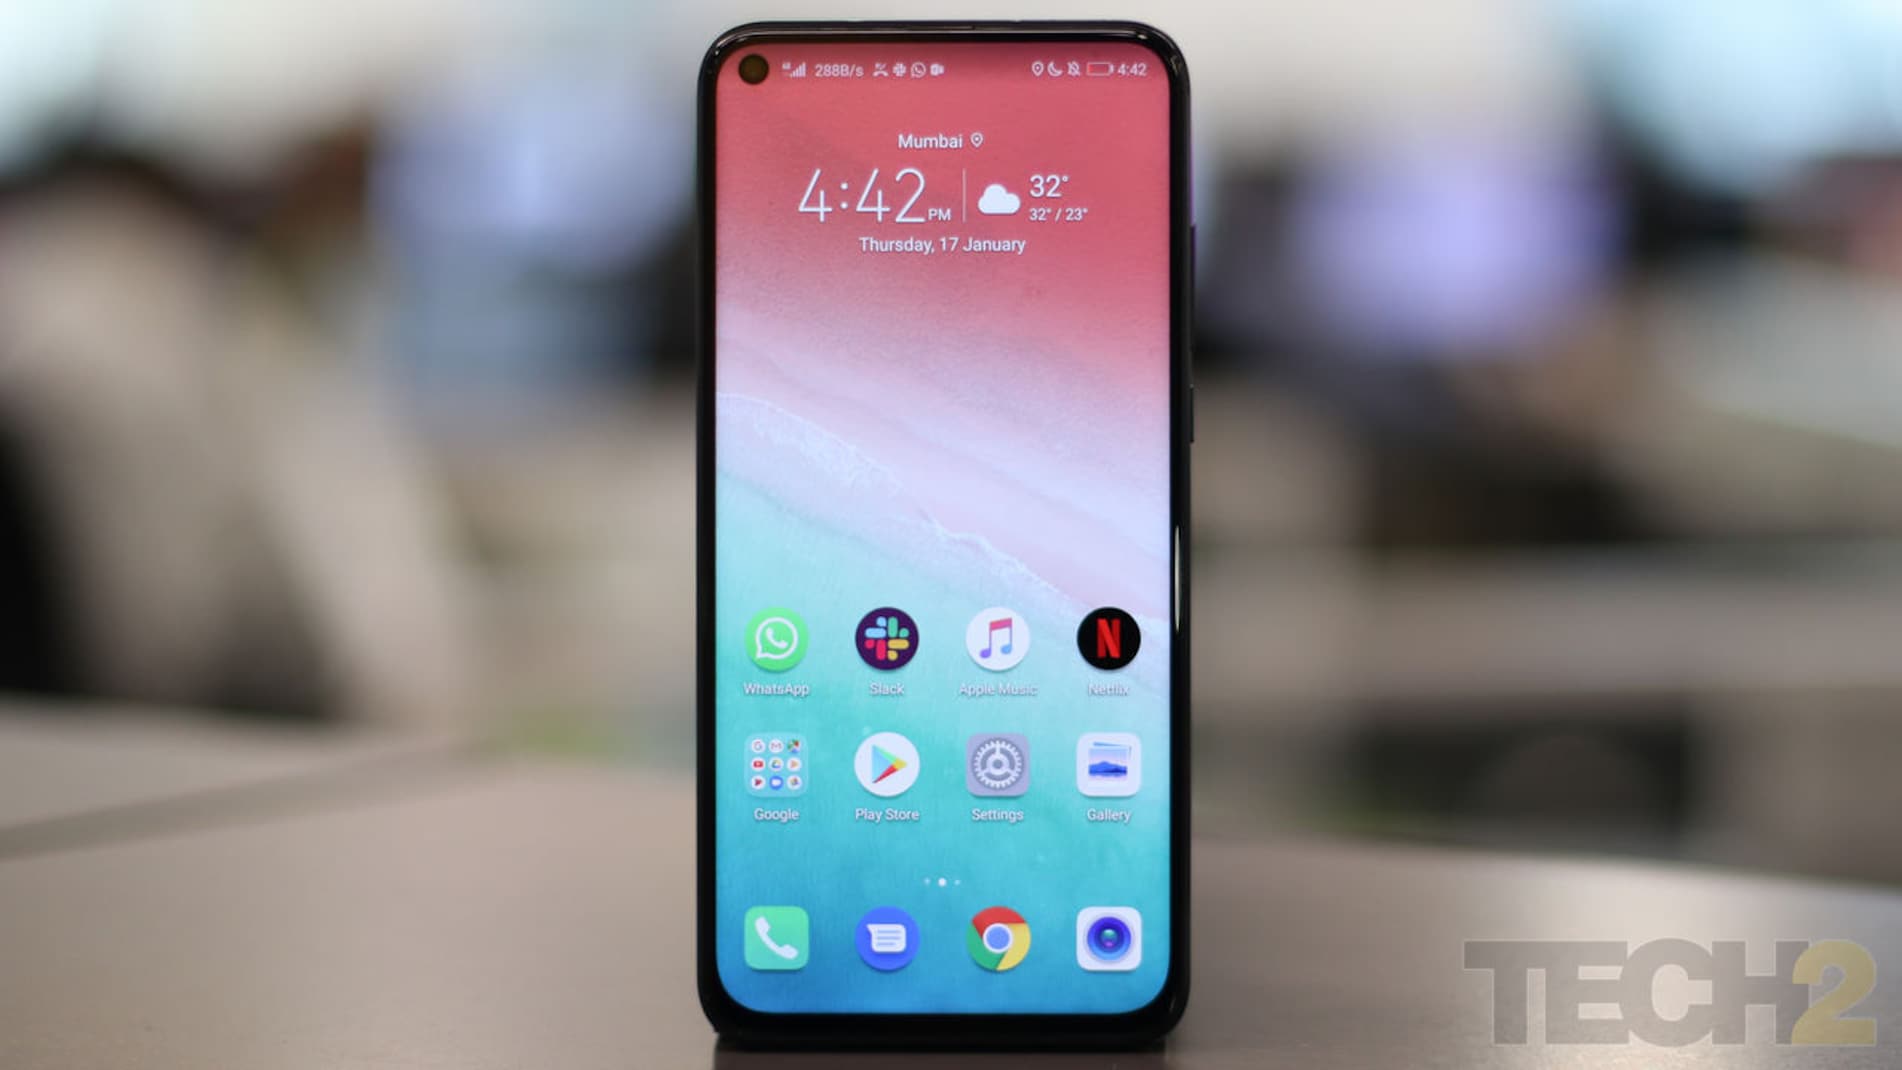 The Honor View 20 is the second smartphone to be announced globally after the Samsung Galaxy A8s to feature a punch-hole camera and is expected to launch on 29 January in India. Image: tech2/Omkar Patne